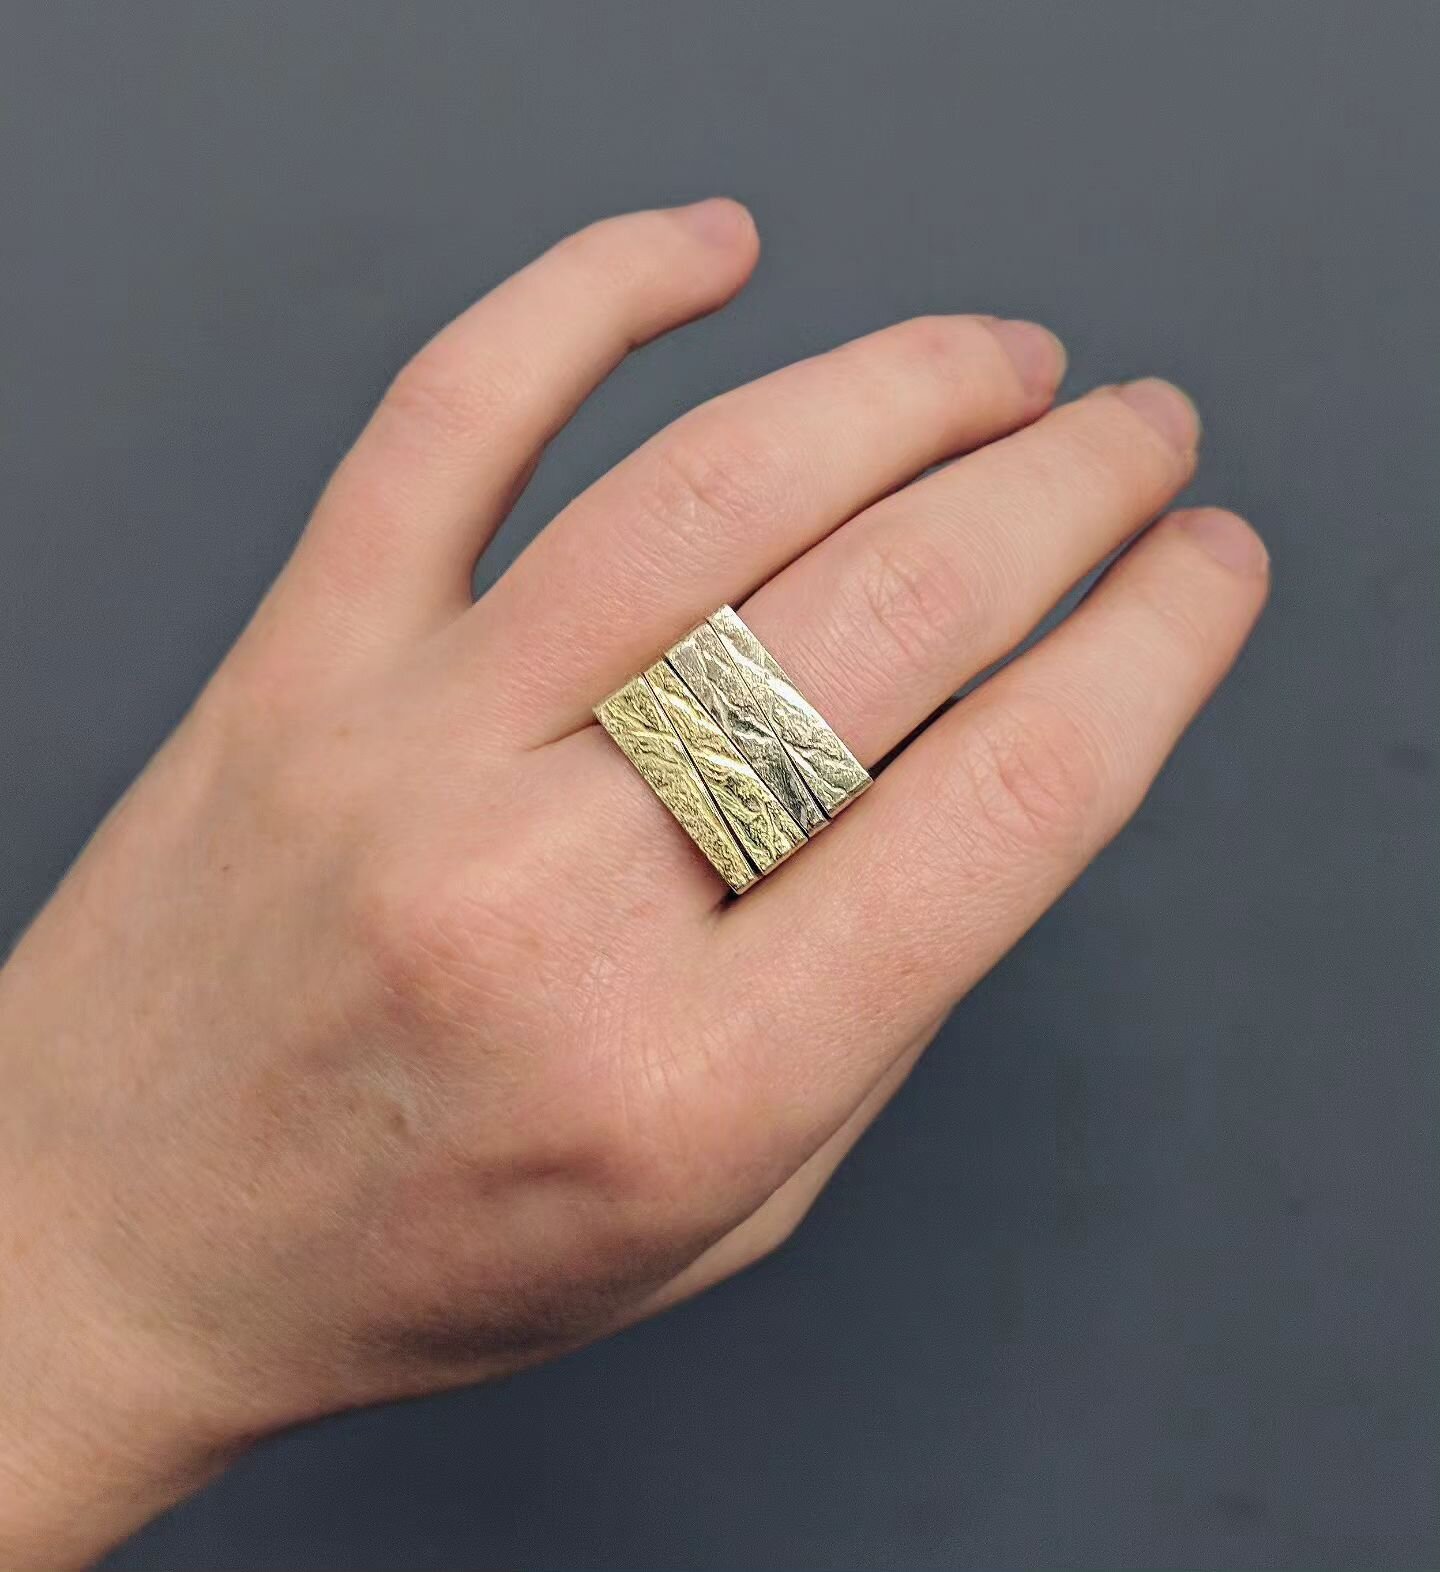 It's been a little while since I've made one of these rings... Time to get back to making some squares.

#squarering #squarerings #stackingrings #lovegold #scottishjewellery #madeinscotland #scottishdesign